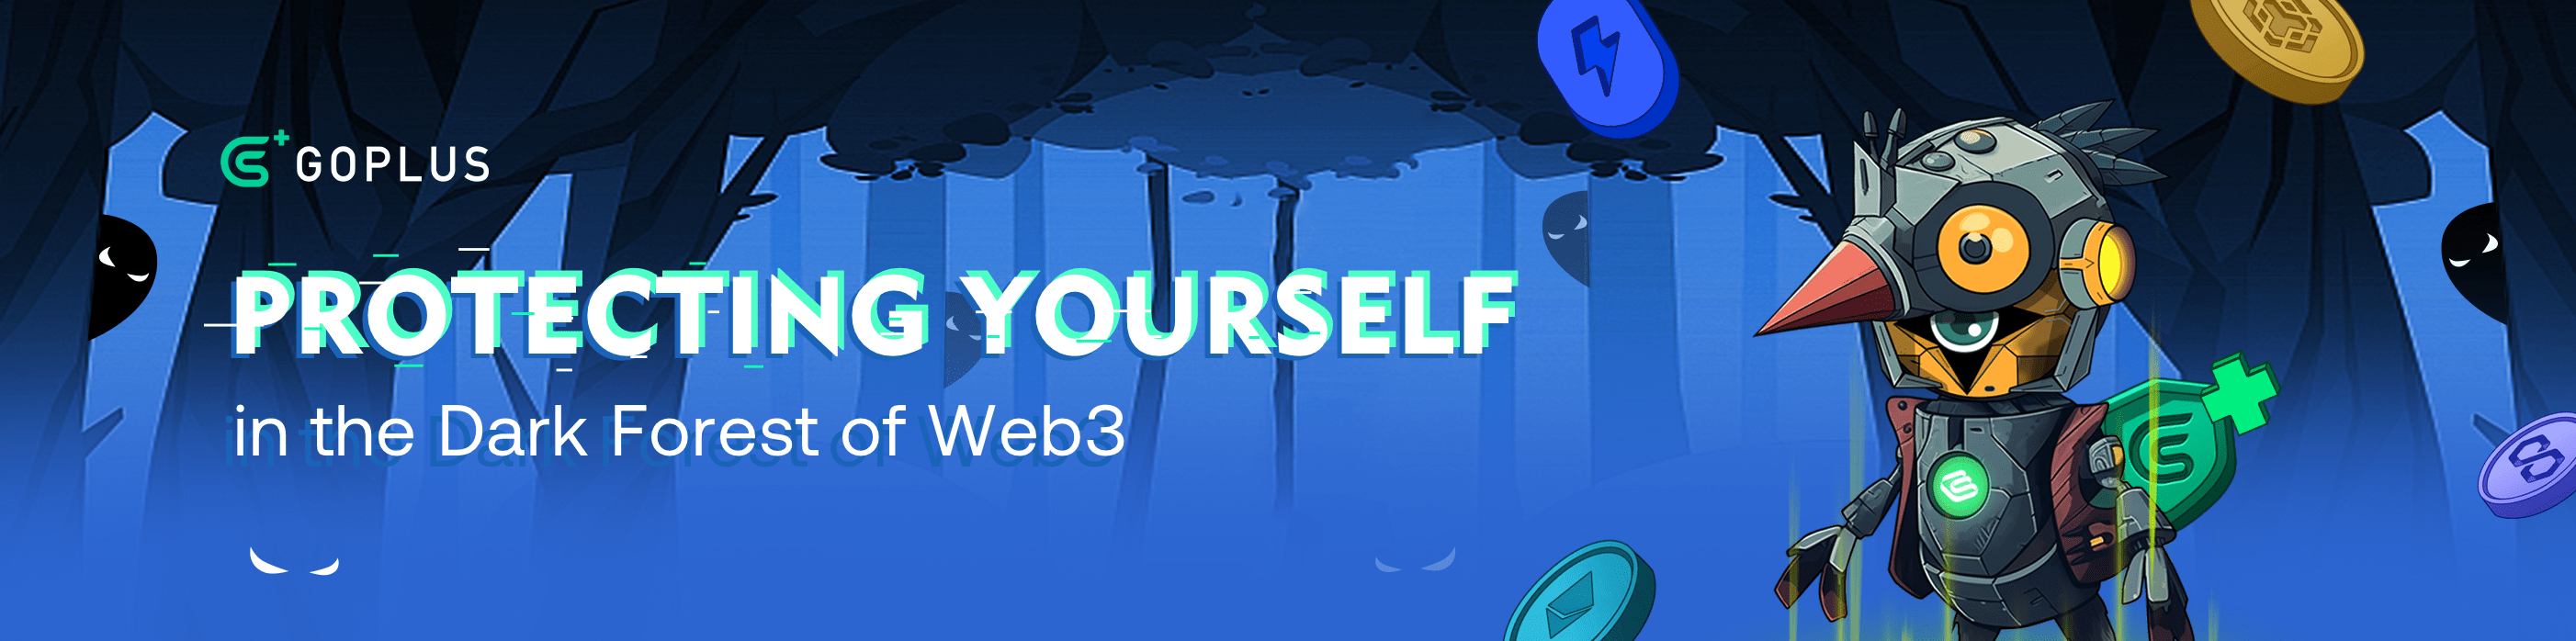 Protecting Yourself in the Dark Forest of Web3 cover